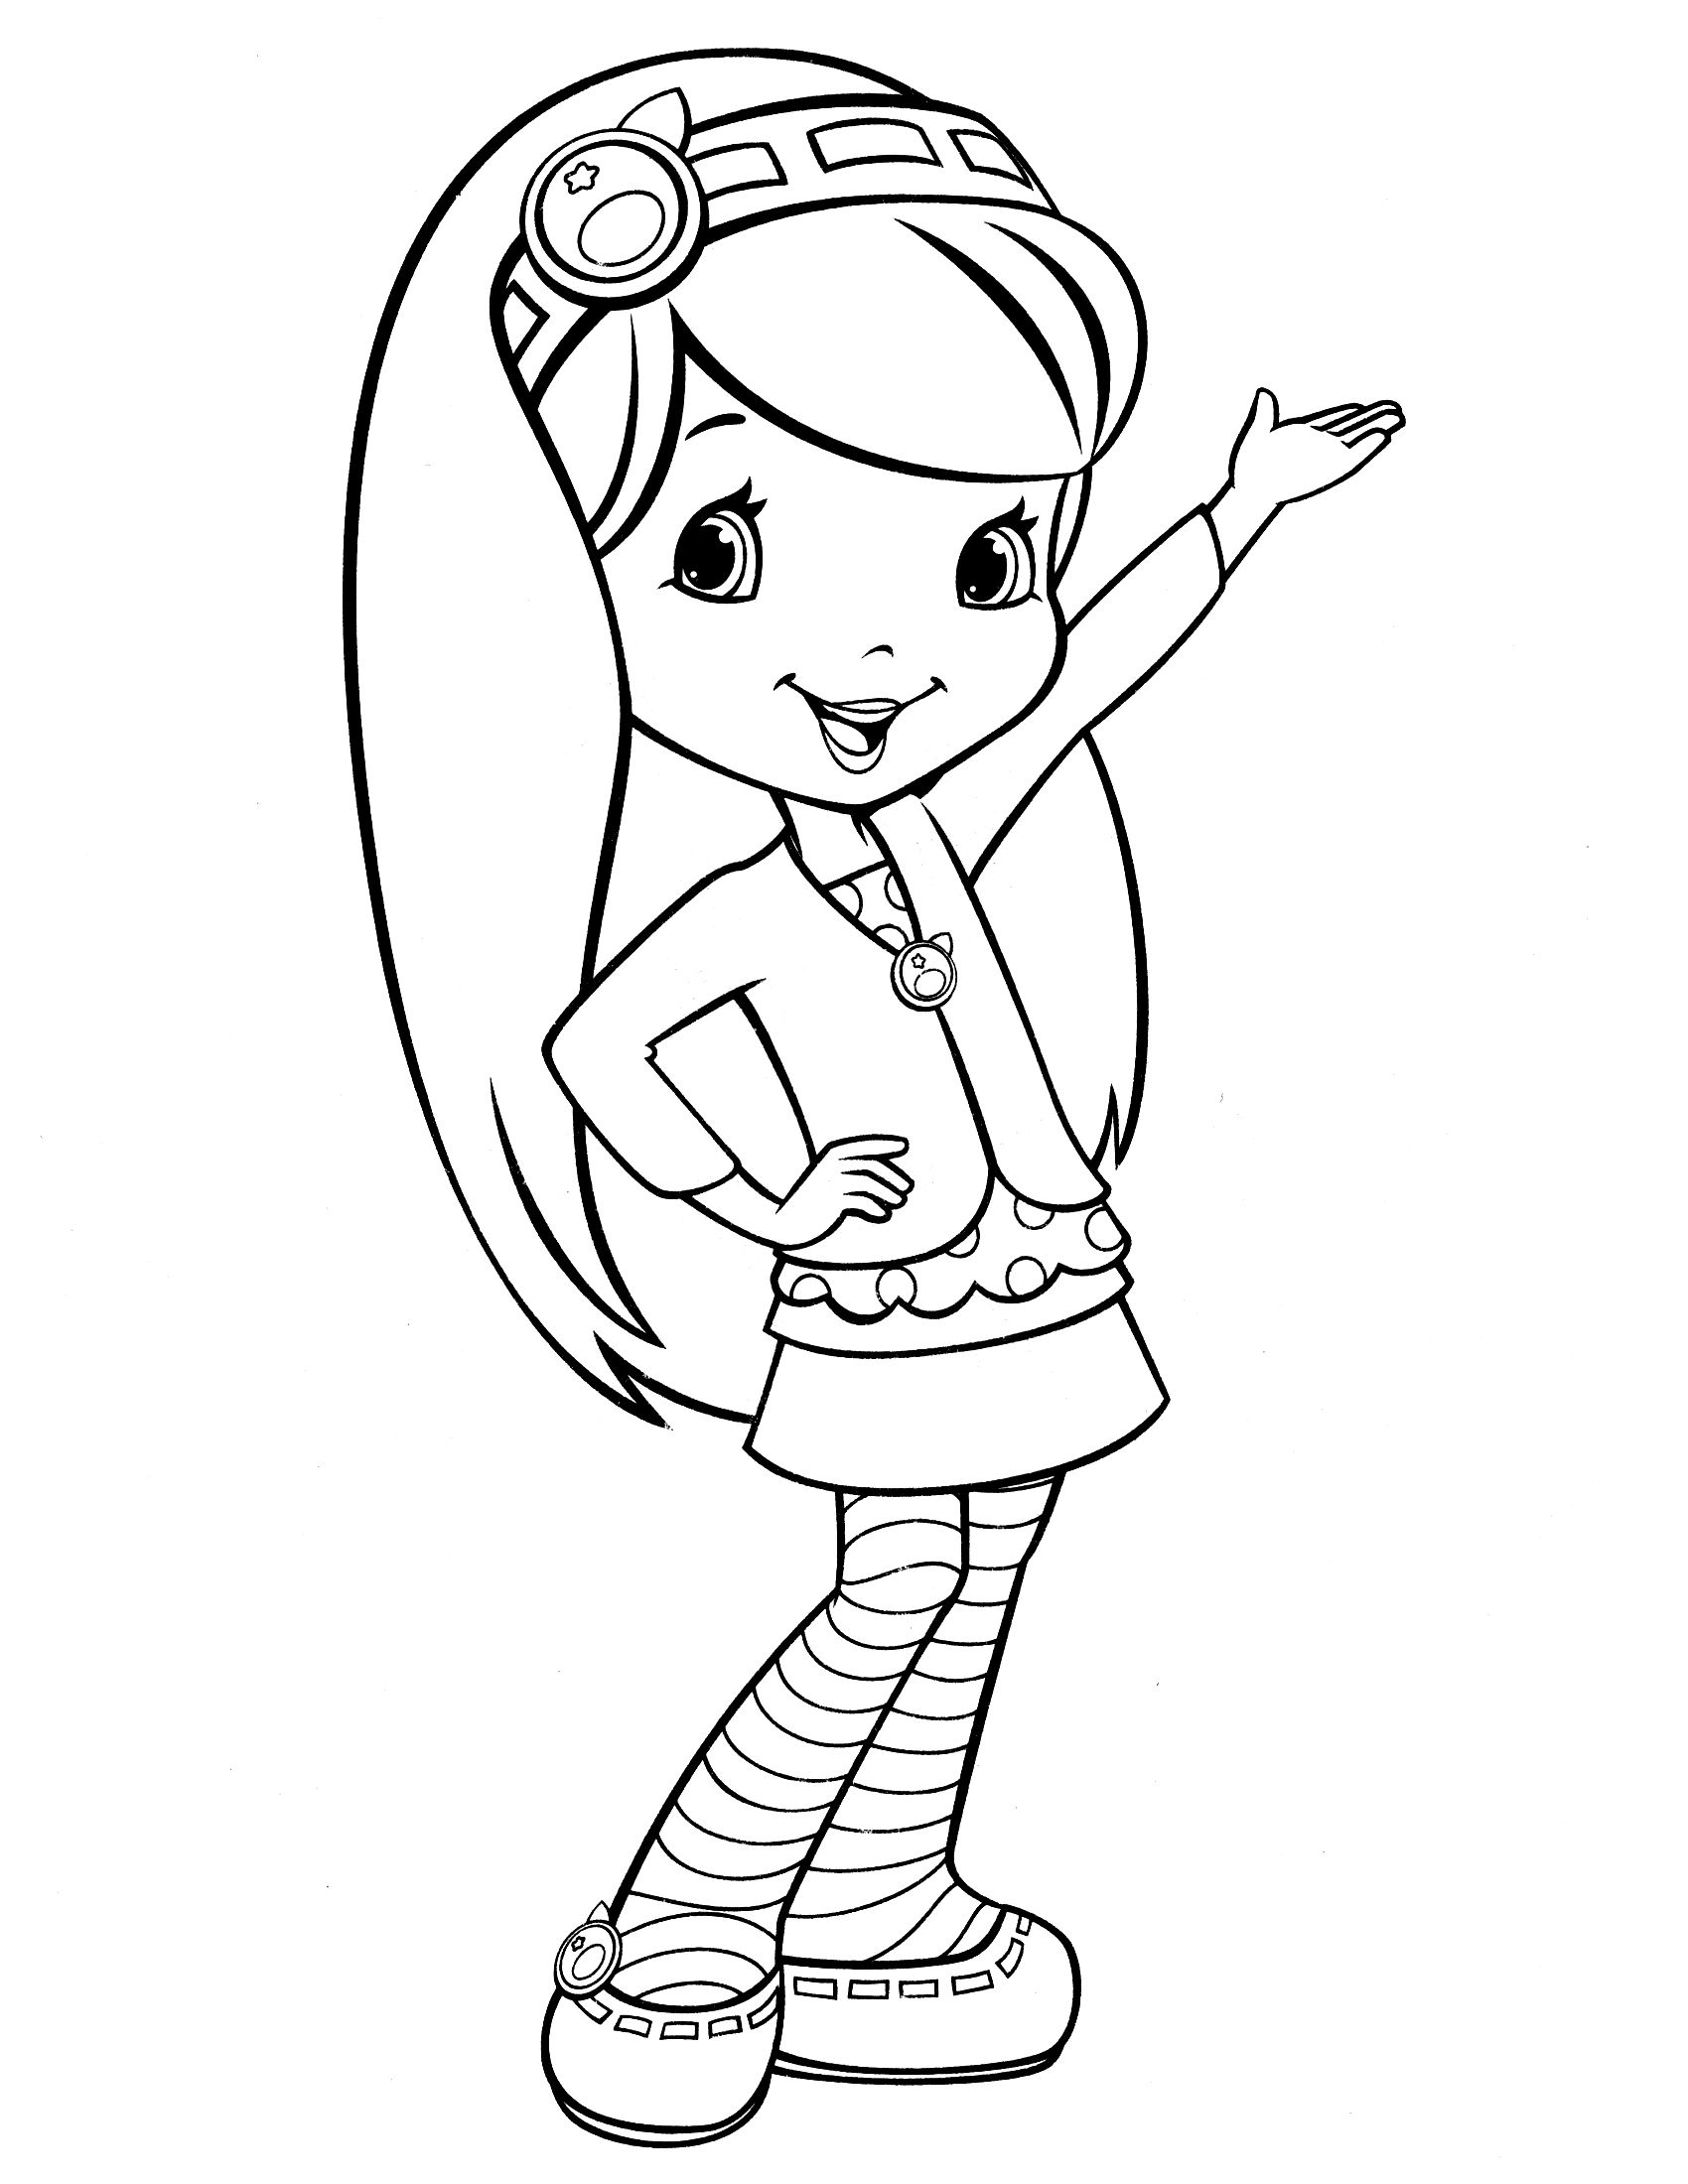 strawberry shortcake characters coloring pages pin by velichka petkova on Детски strawberry shortcake shortcake coloring strawberry characters pages 